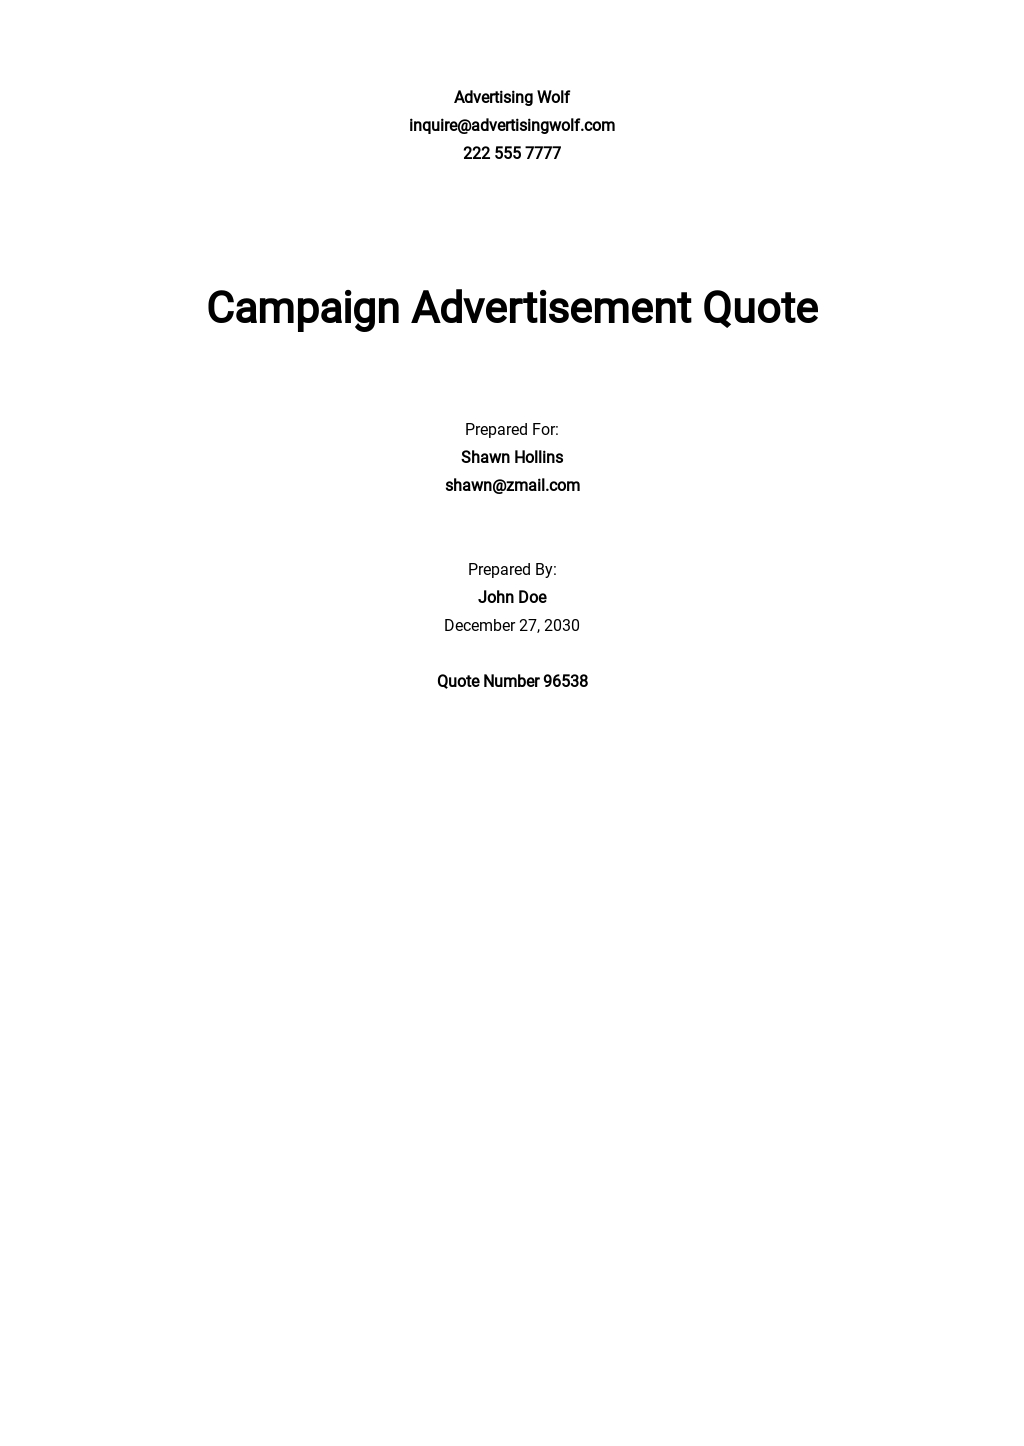 Advertising Services Quotation Template - Google Docs, Google Sheets, Excel, Word